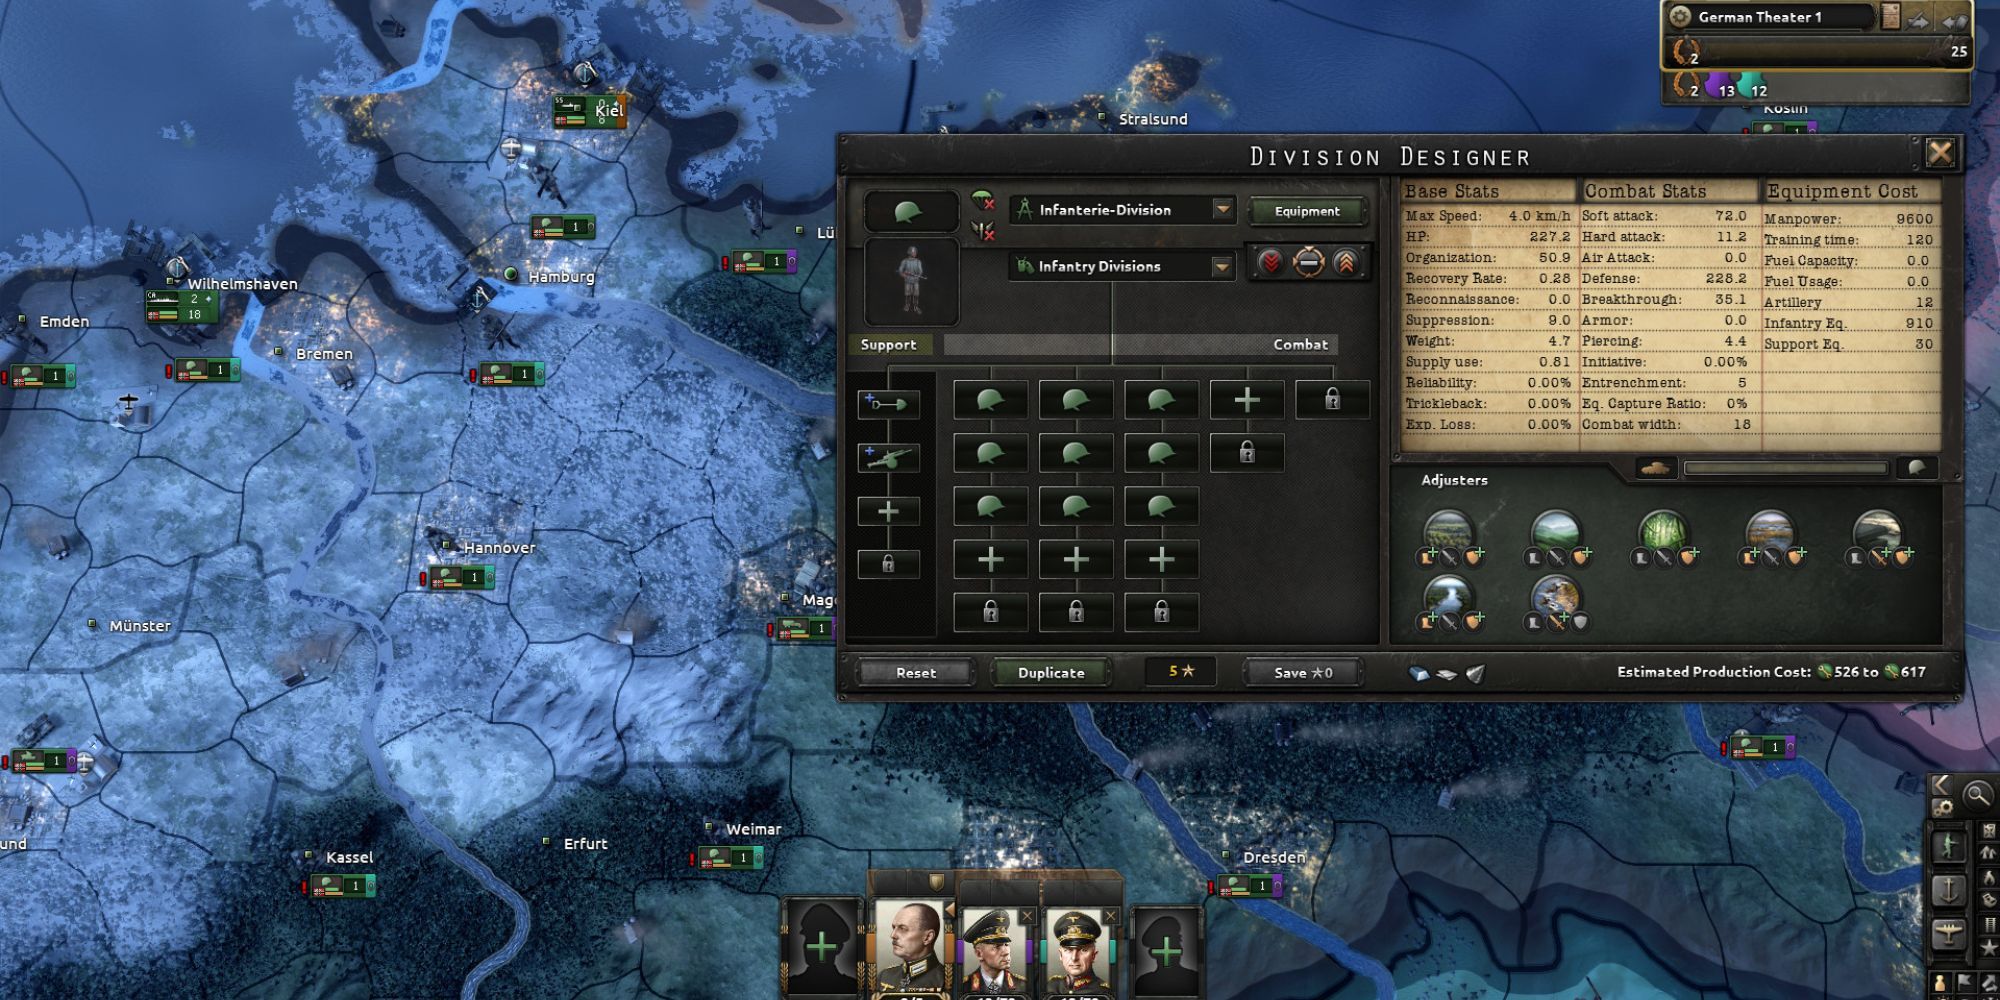 A player looking at the Division DesGameTopicer in Hearts of Iron 4